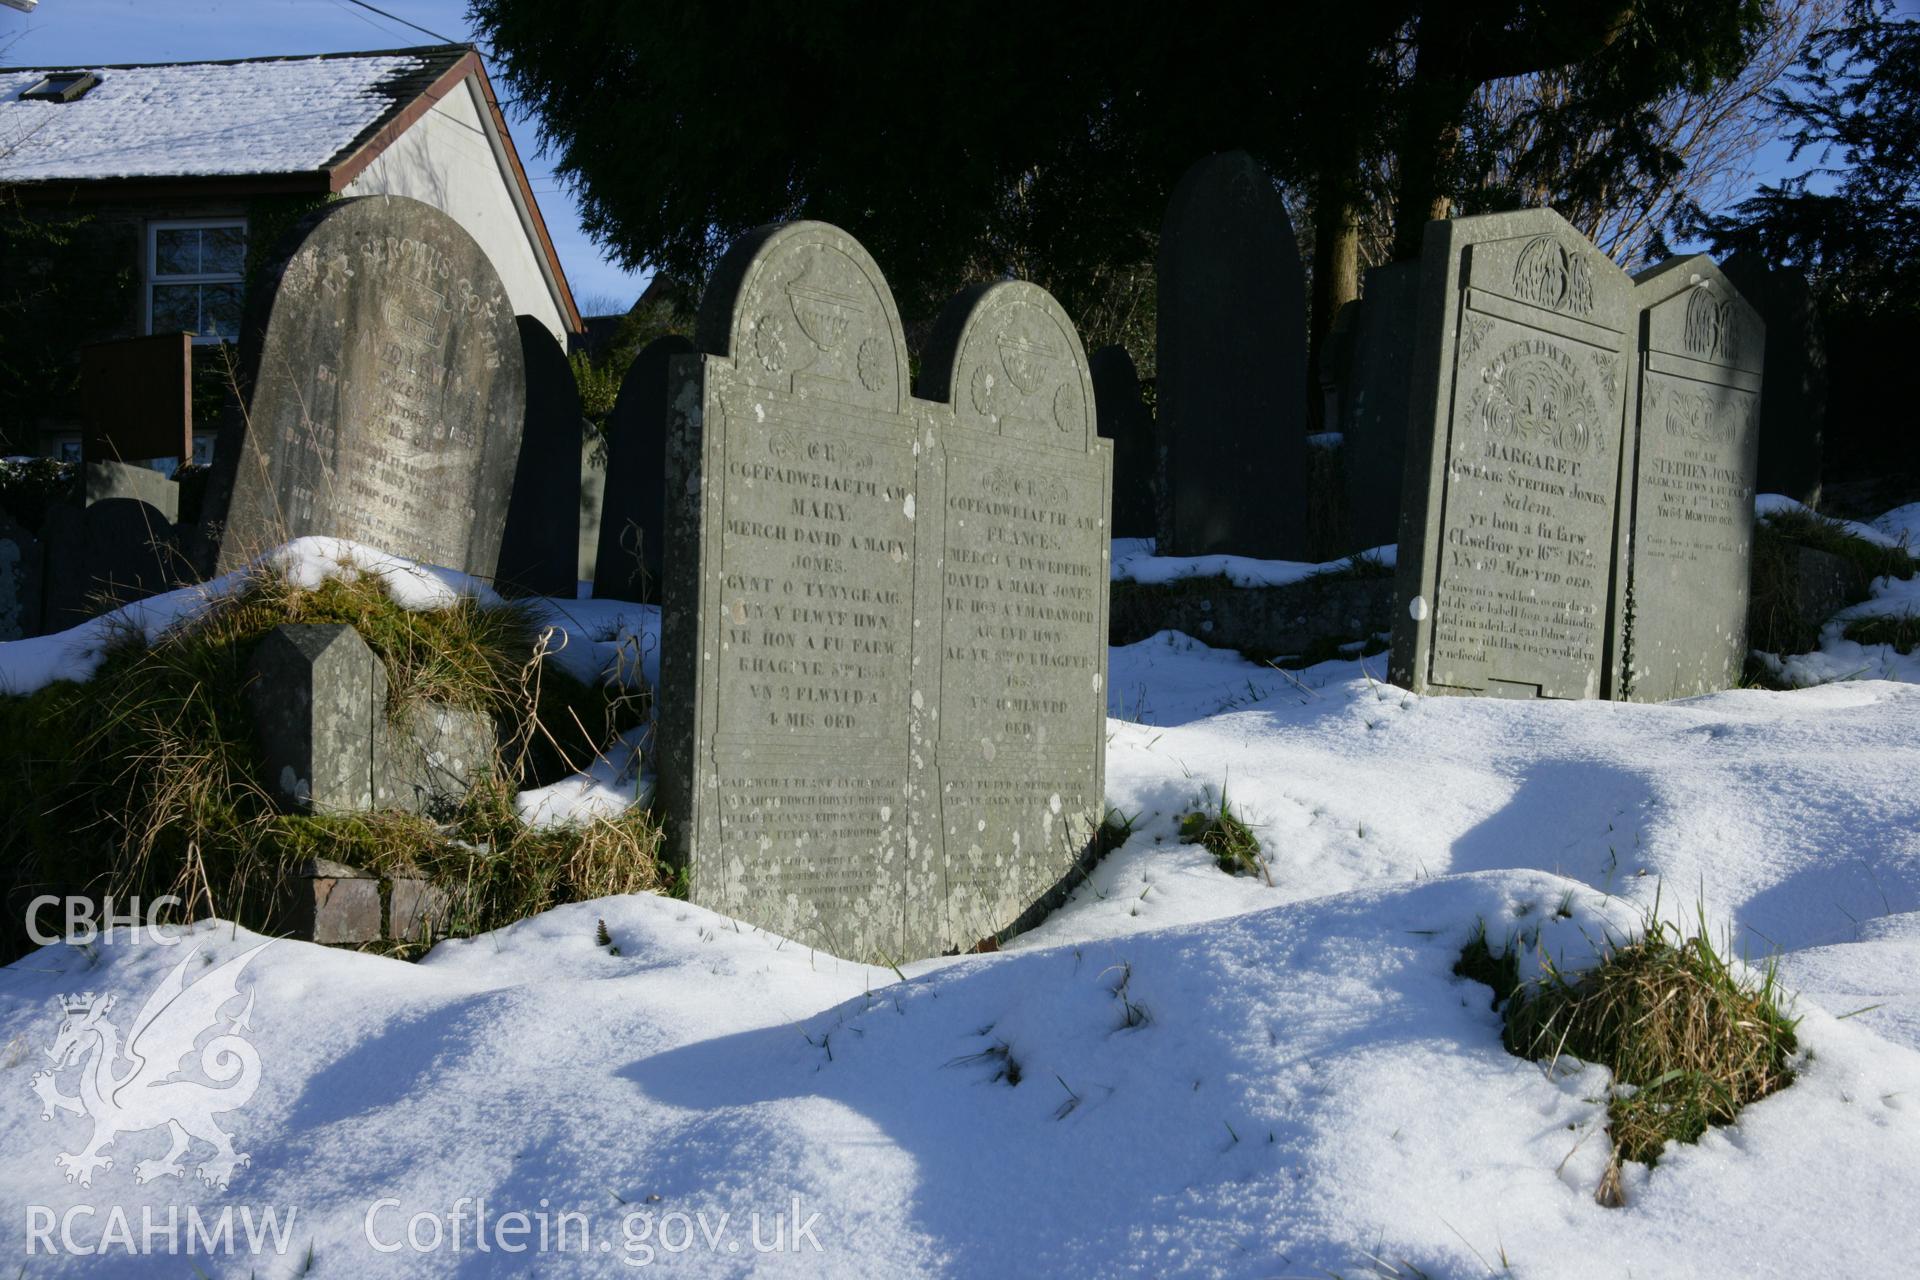 Salem Chapel, general view of gravestones in south-east part of cemetery, with snow.